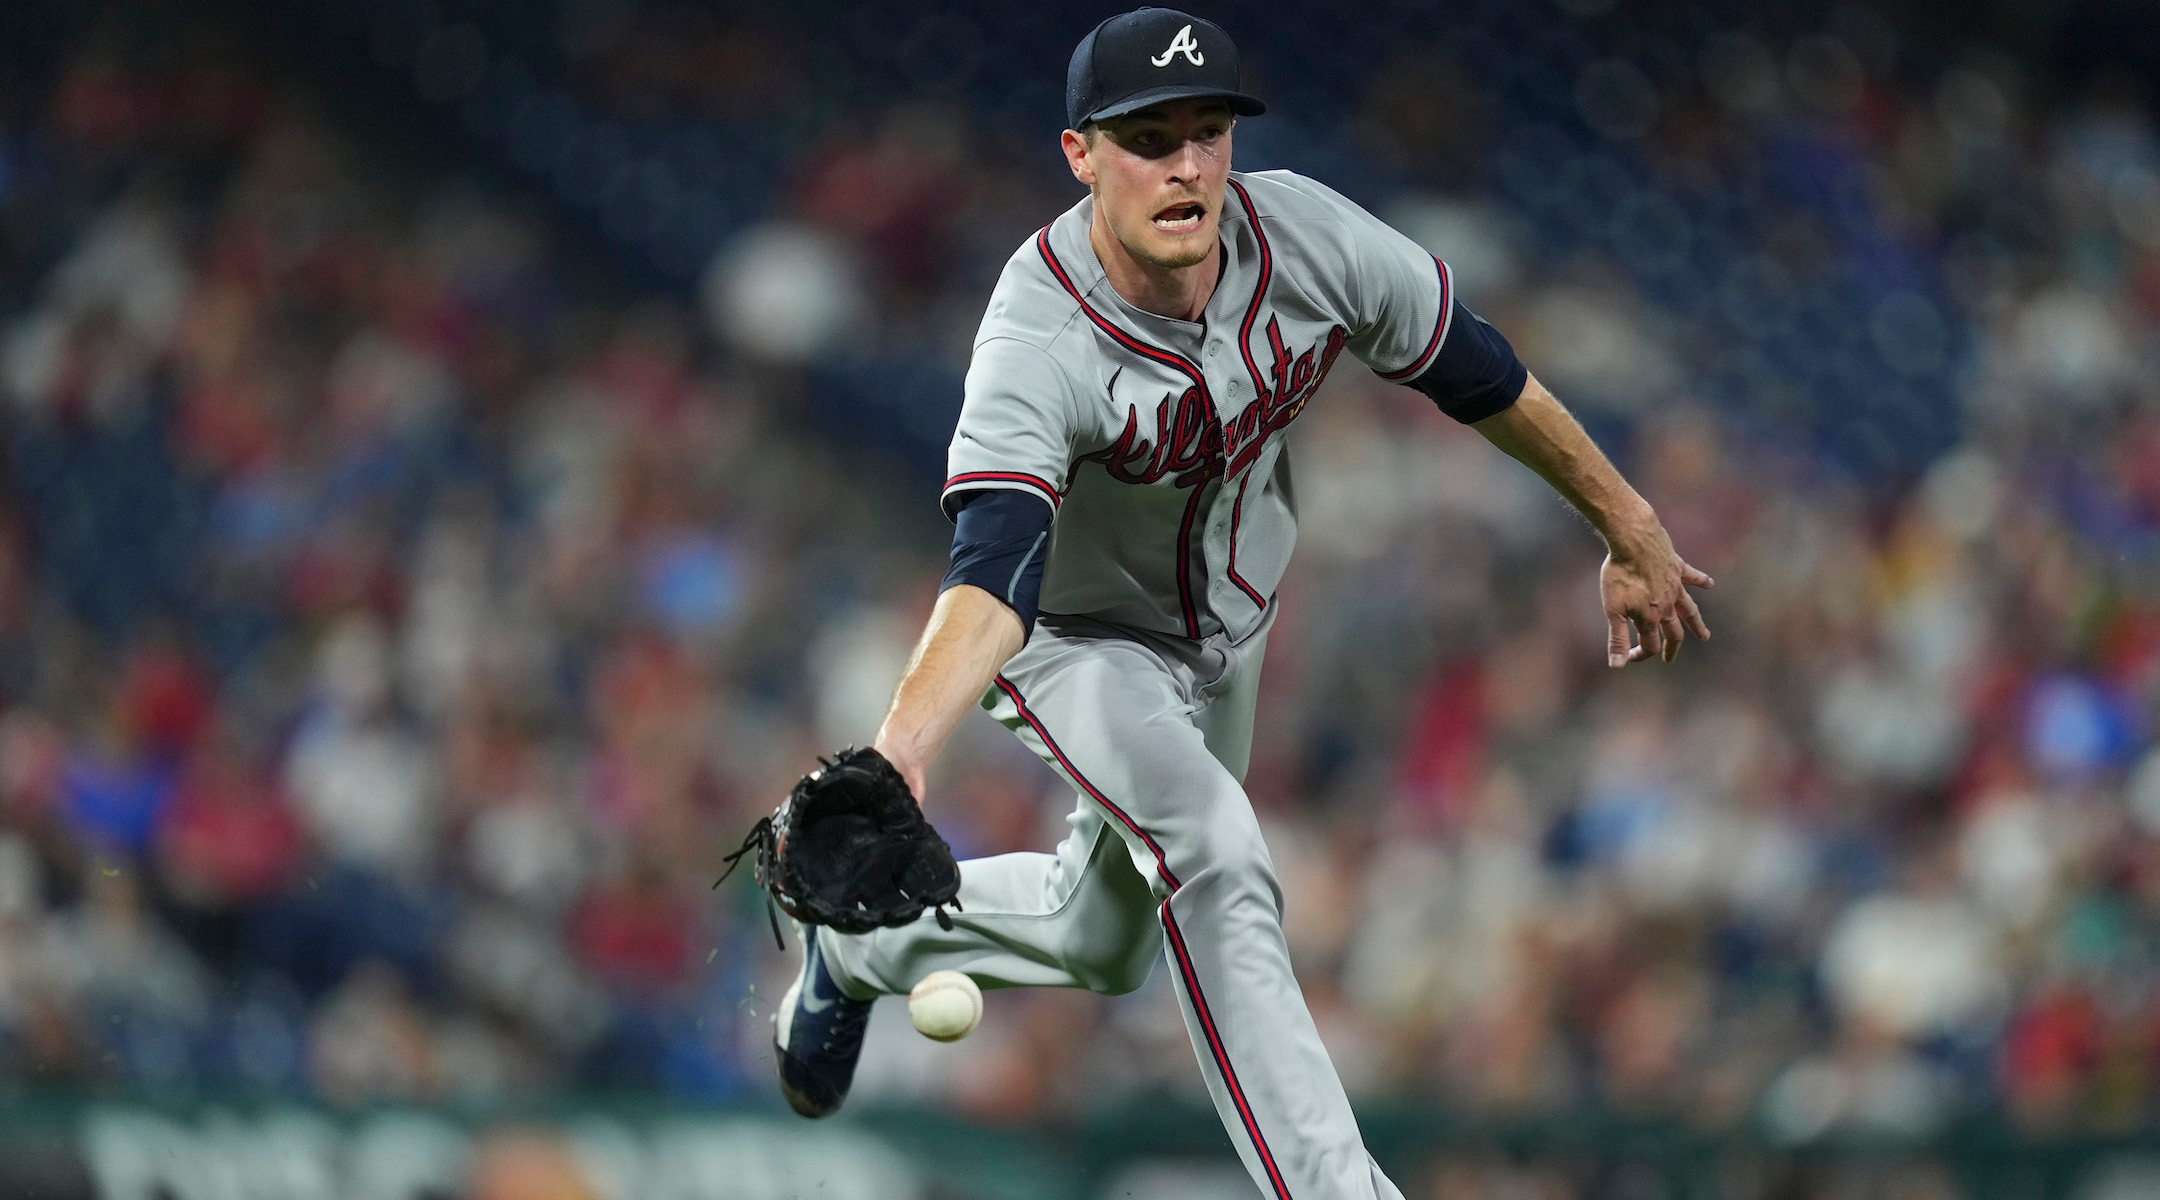 Max Fried flips the ball to first base during a game against the Philadelphia Phillies, July 25, 2022. (Mitchell Leff/Getty Images)